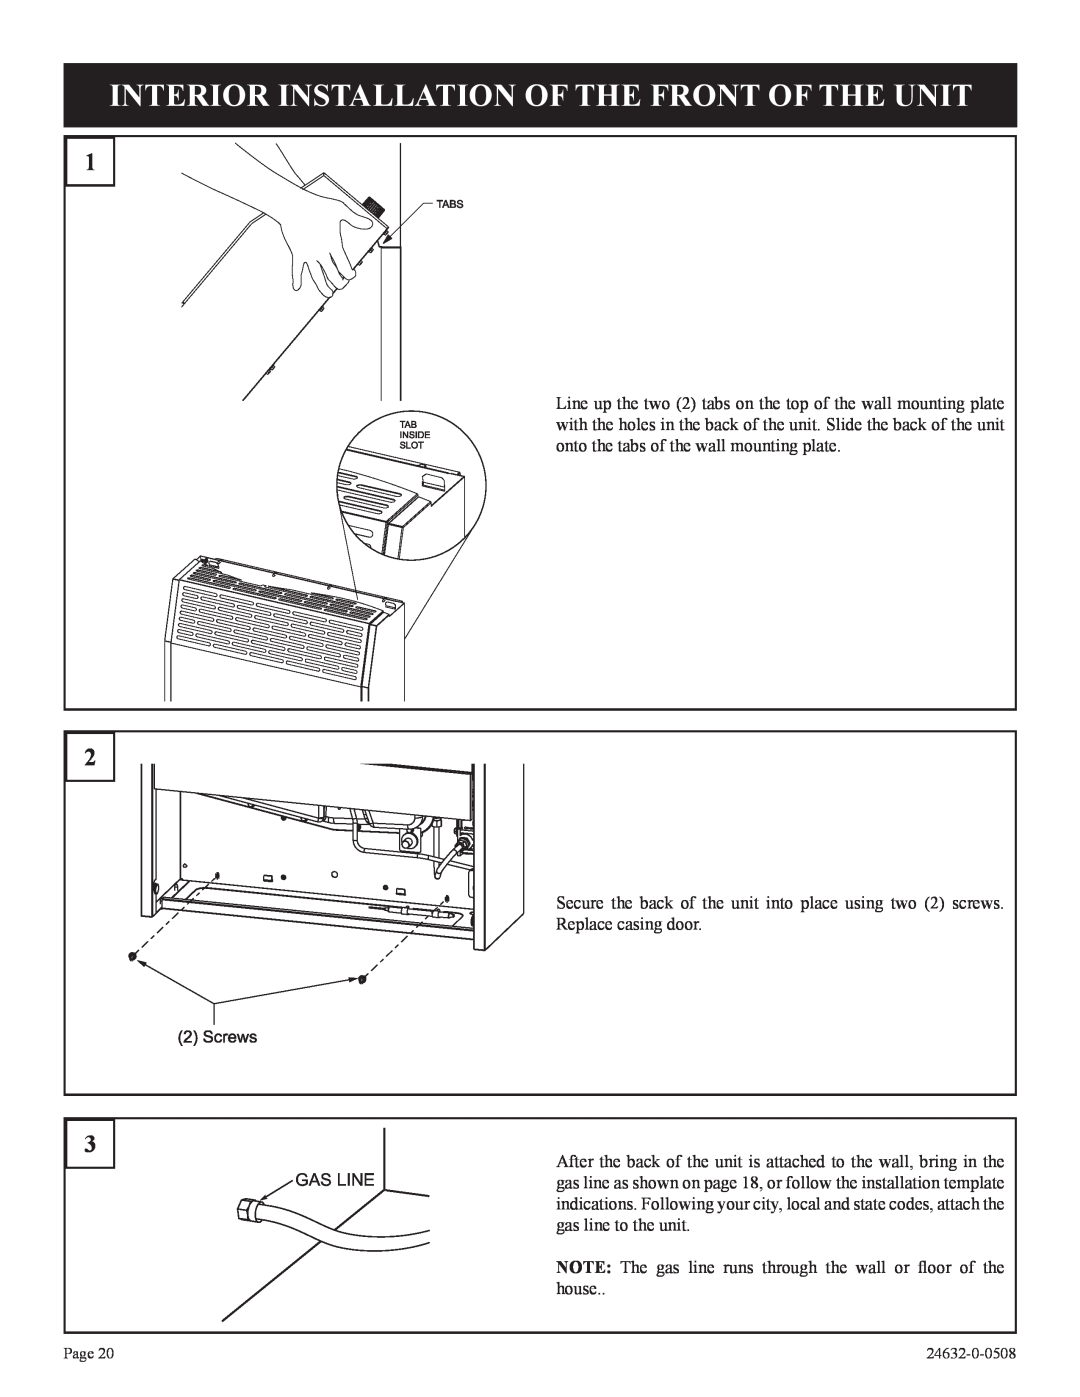 Epson HWDV080DV(N, P)-1 installation instructions Interior Installation Of The Front Of The Unit 